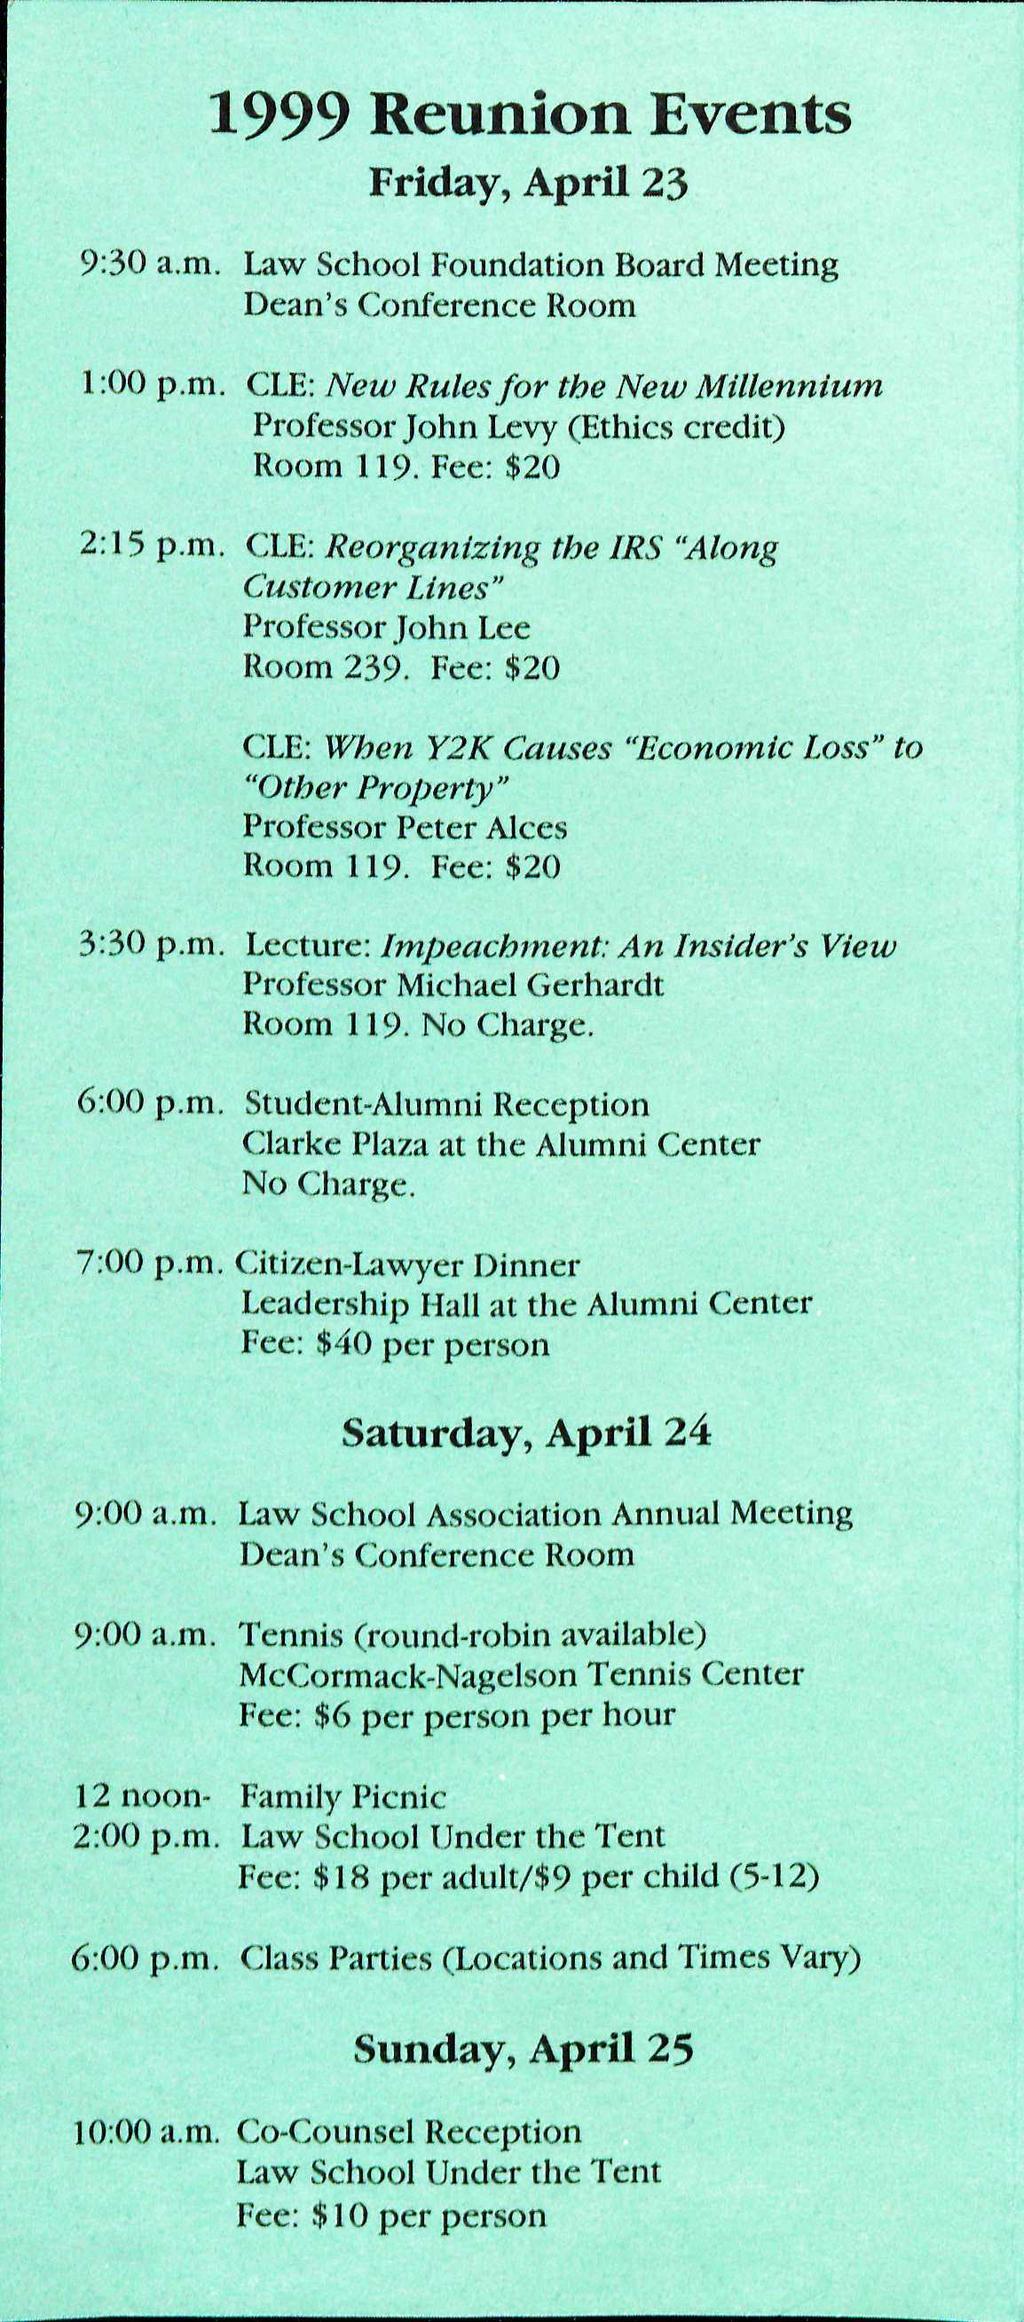 1999 Reunion Events Friday, April 23 9:30 a.rn, Law School Foundation Board Meeting Dean's Conference Room 1:00 p.m. CLE: New Rules for the New Millennium Professor John Levy (Ethics credit) Room 119.